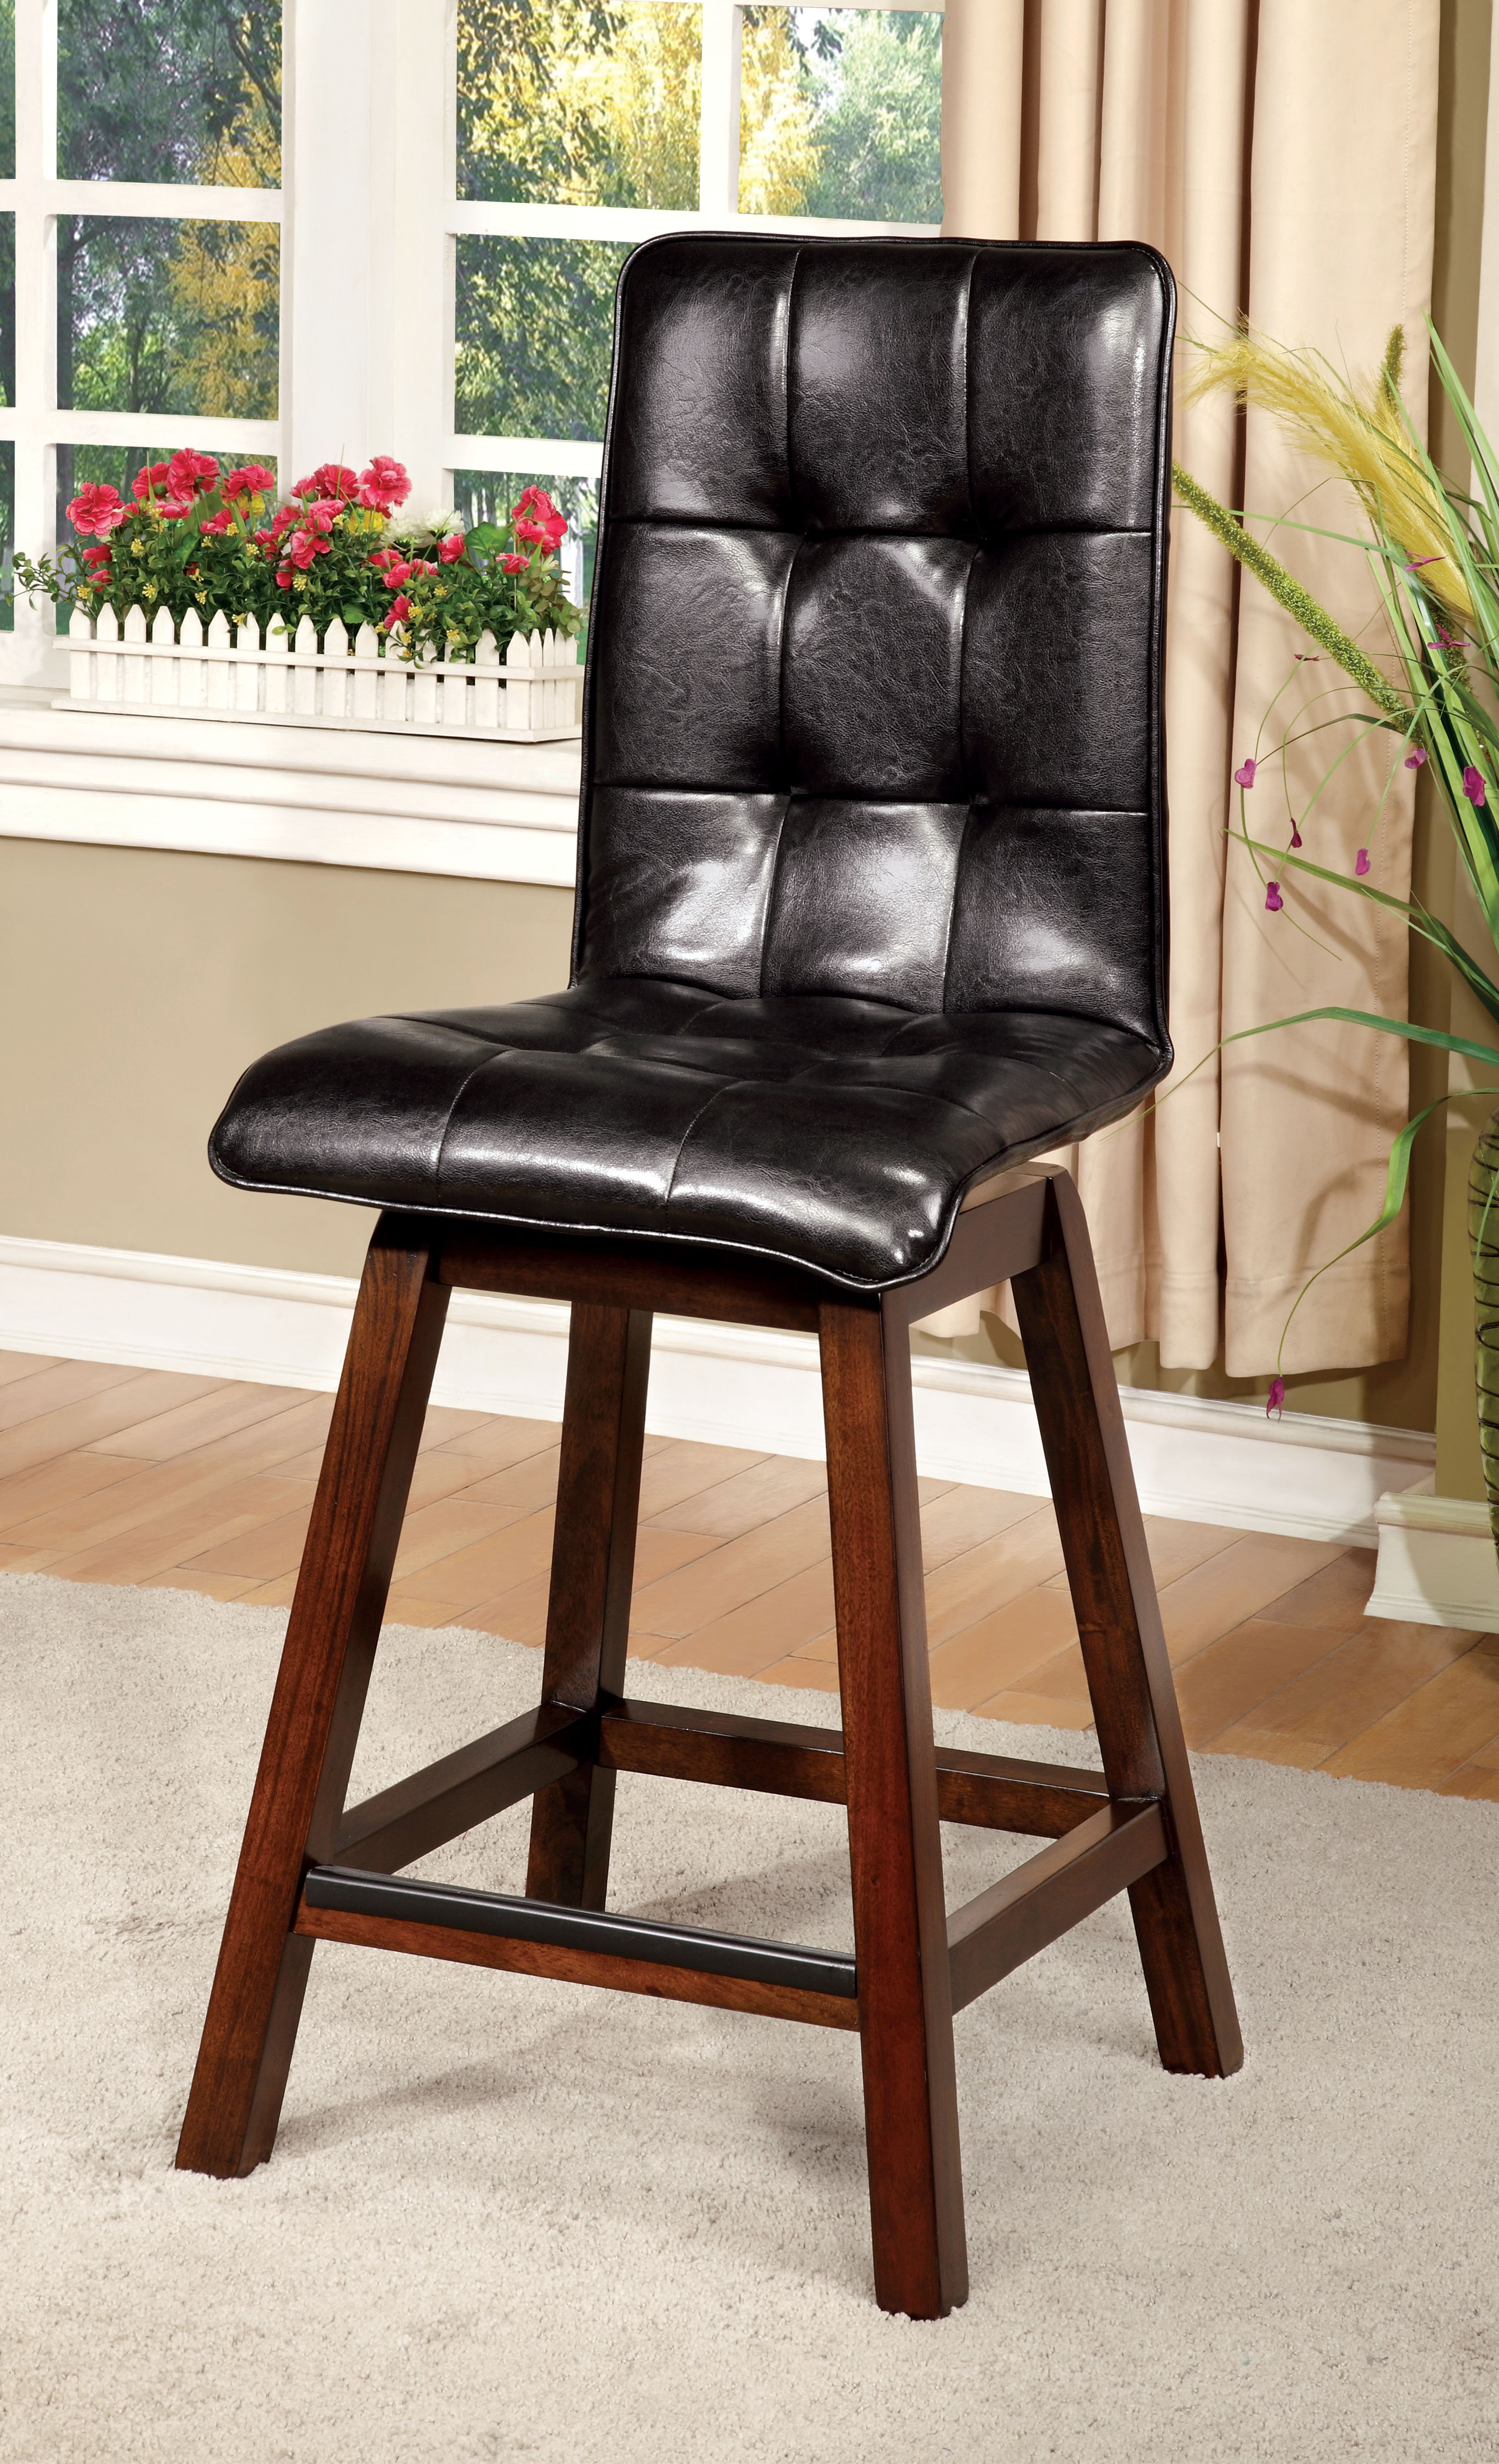 Furniture of America Cherry Lilos 25.5-Inch Counter Height Chair (Set of 2)